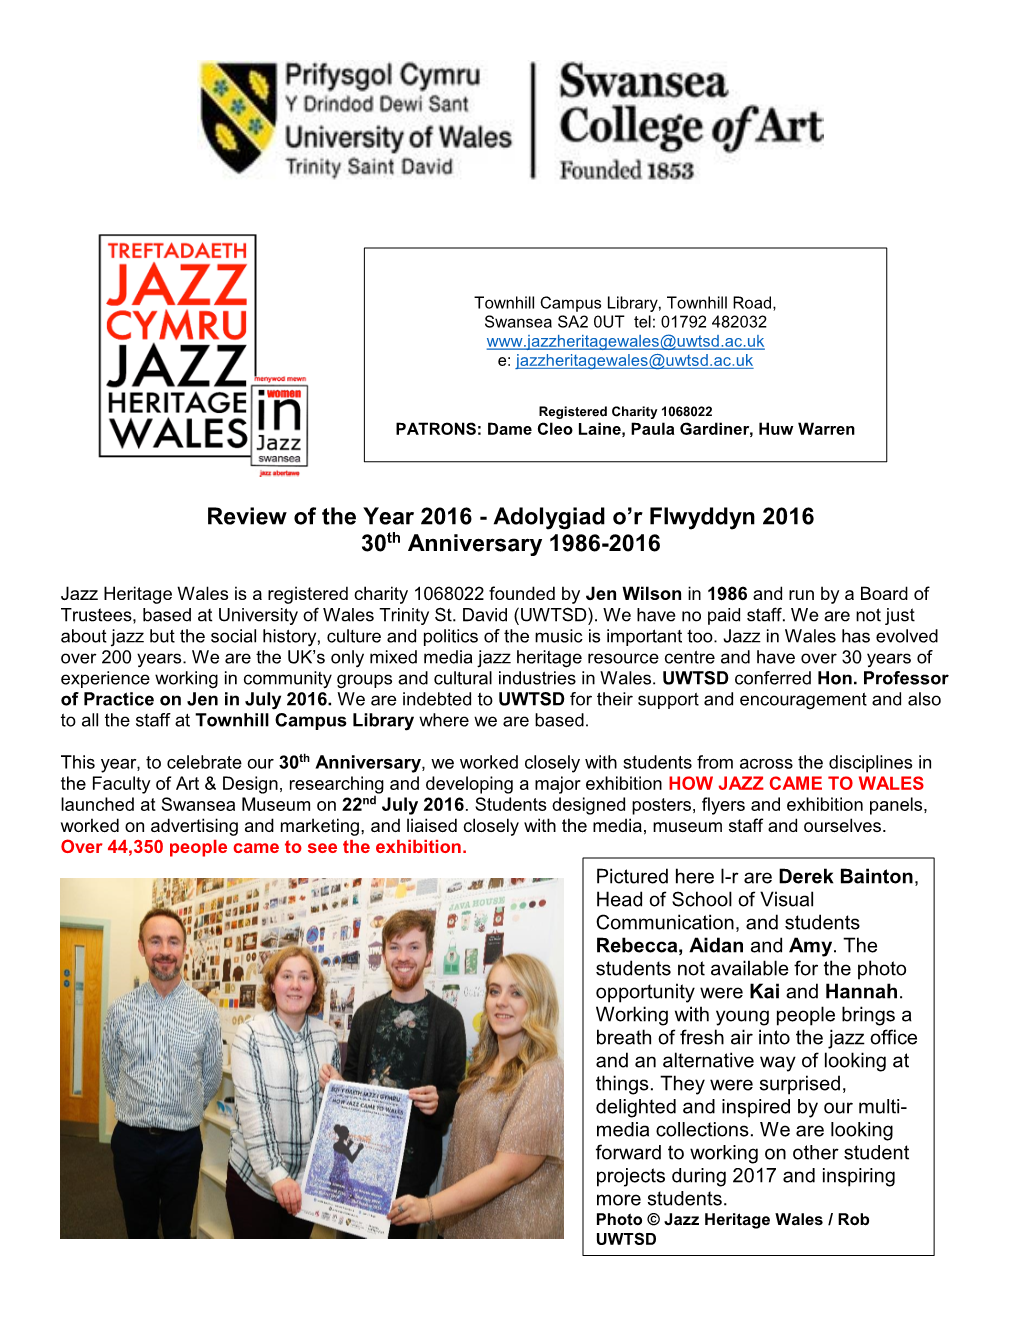 Jazz Heritage Wales Annual Review 2016